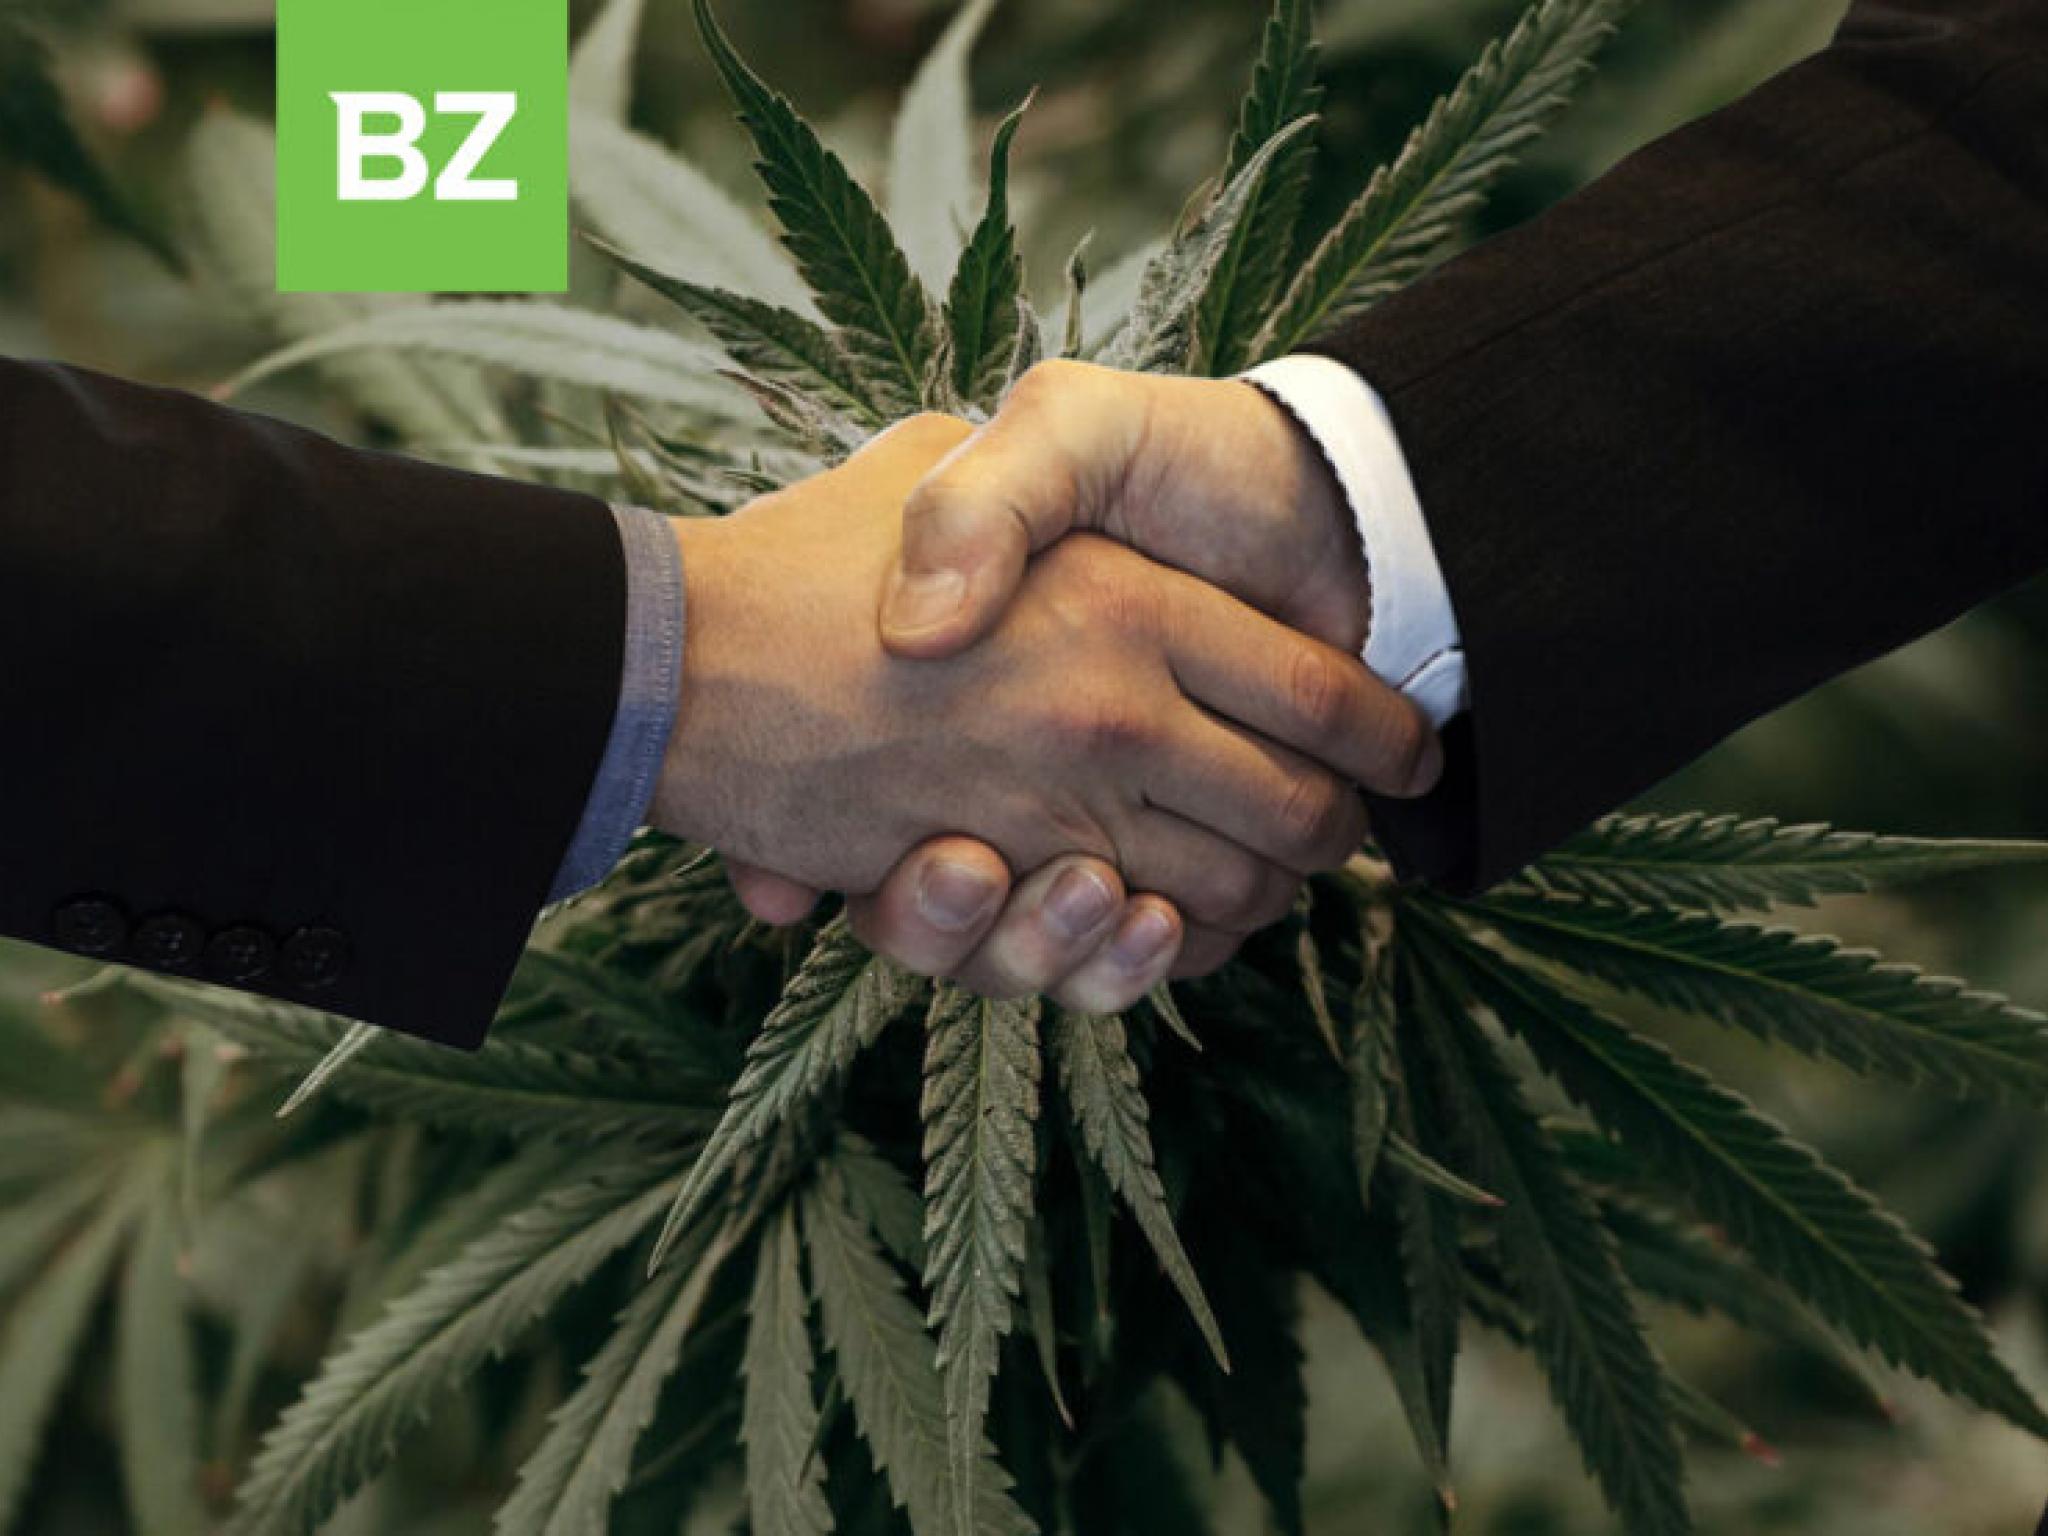  canadian-home-of-cookies-sherbinskis-and-wyld-cannabis-brands-acquired-as-bzam-consolidates-market-presence 